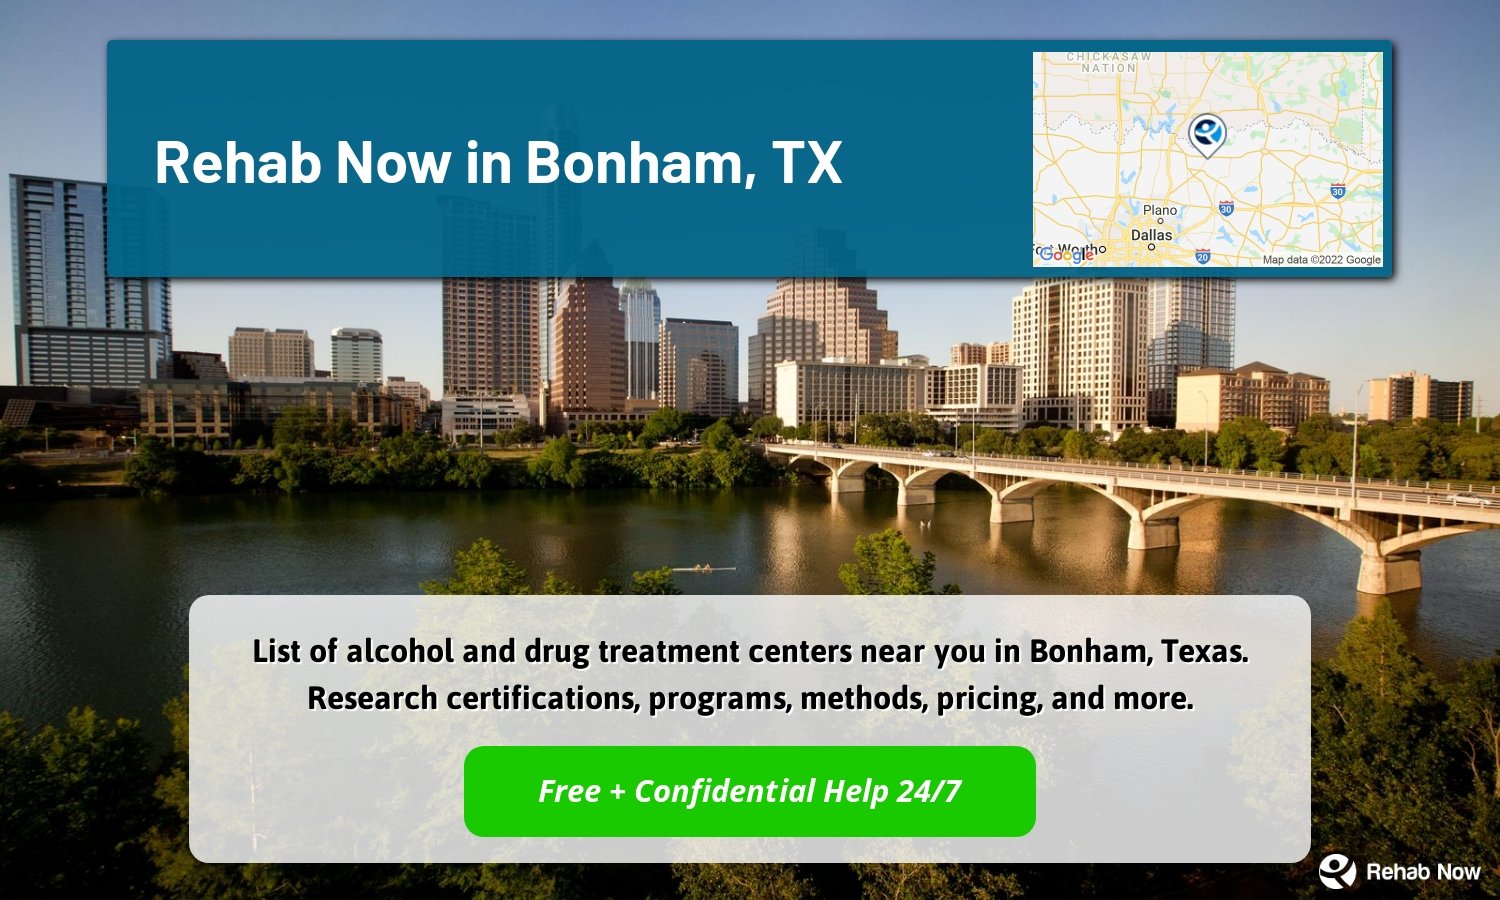 List of alcohol and drug treatment centers near you in Bonham, Texas. Research certifications, programs, methods, pricing, and more.